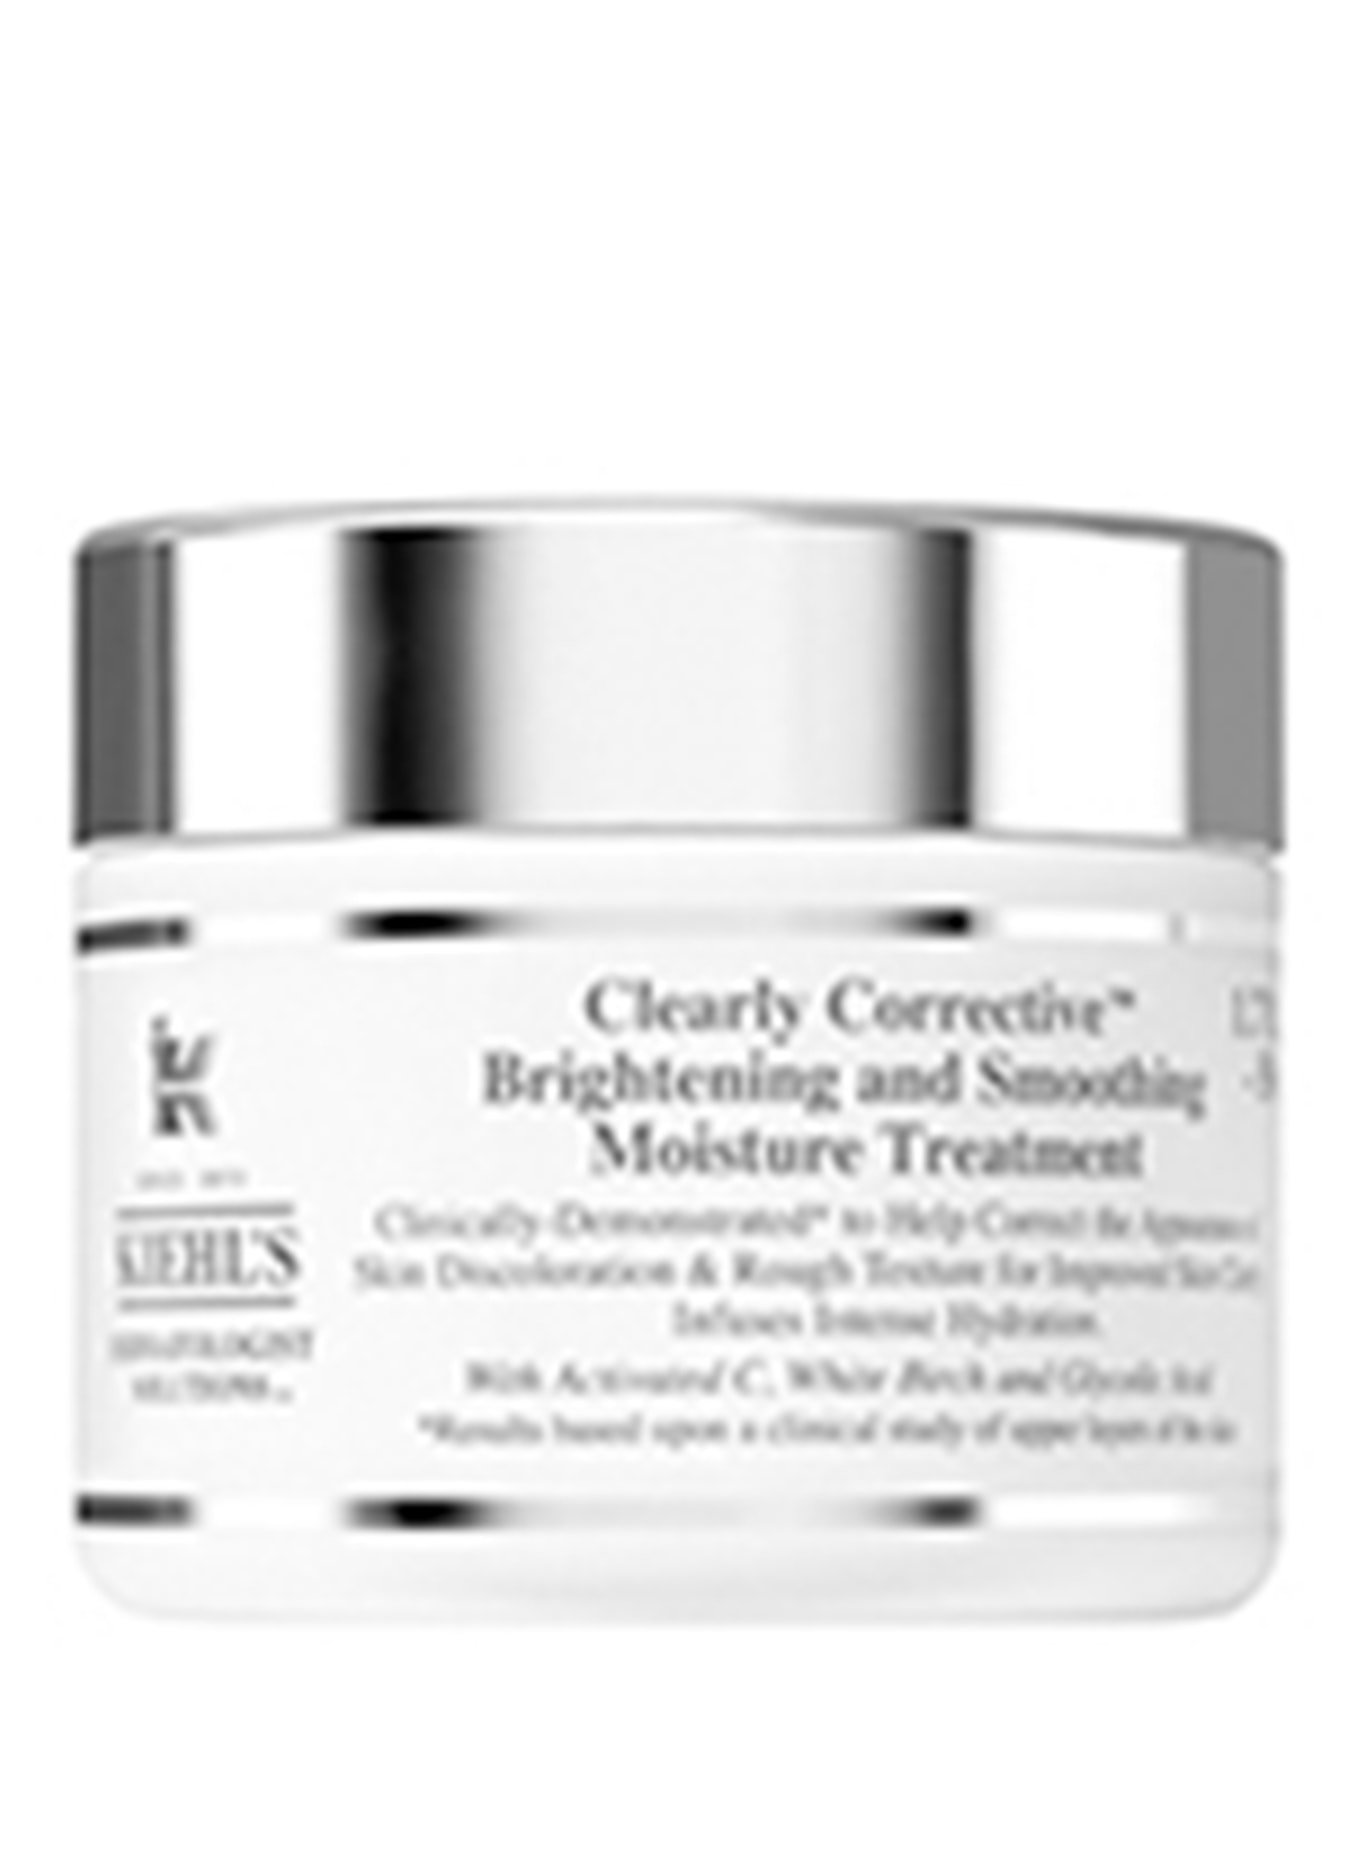 Kiehl's CLEARLY CORRECTIVE™ BRIGHTENING & SMOOTHING TREATMENT (Obrazek 1)